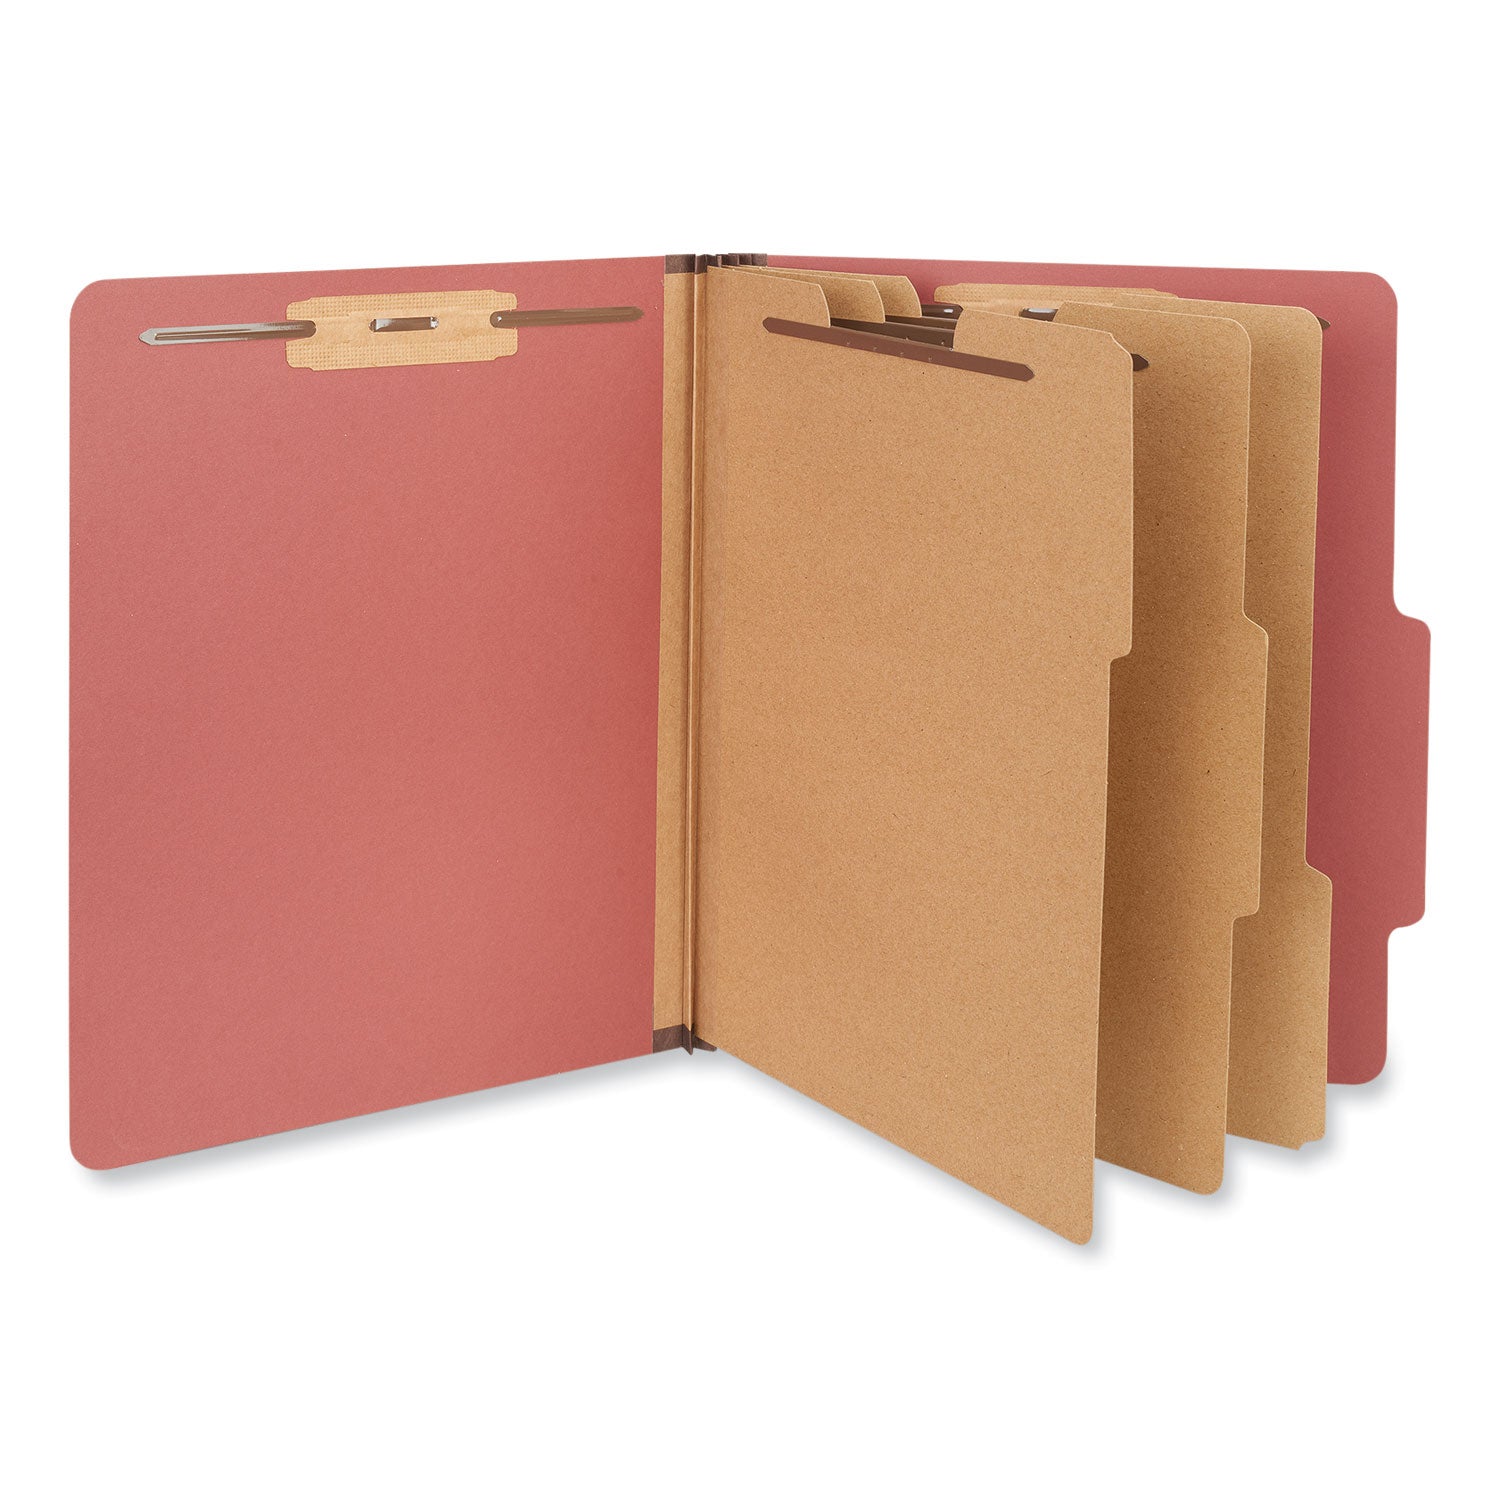 Eight-Section Pressboard Classification Folders, 3" Expansion, 3 Dividers, 8 Fasteners, Letter Size, Red Exterior, 10/Box - 